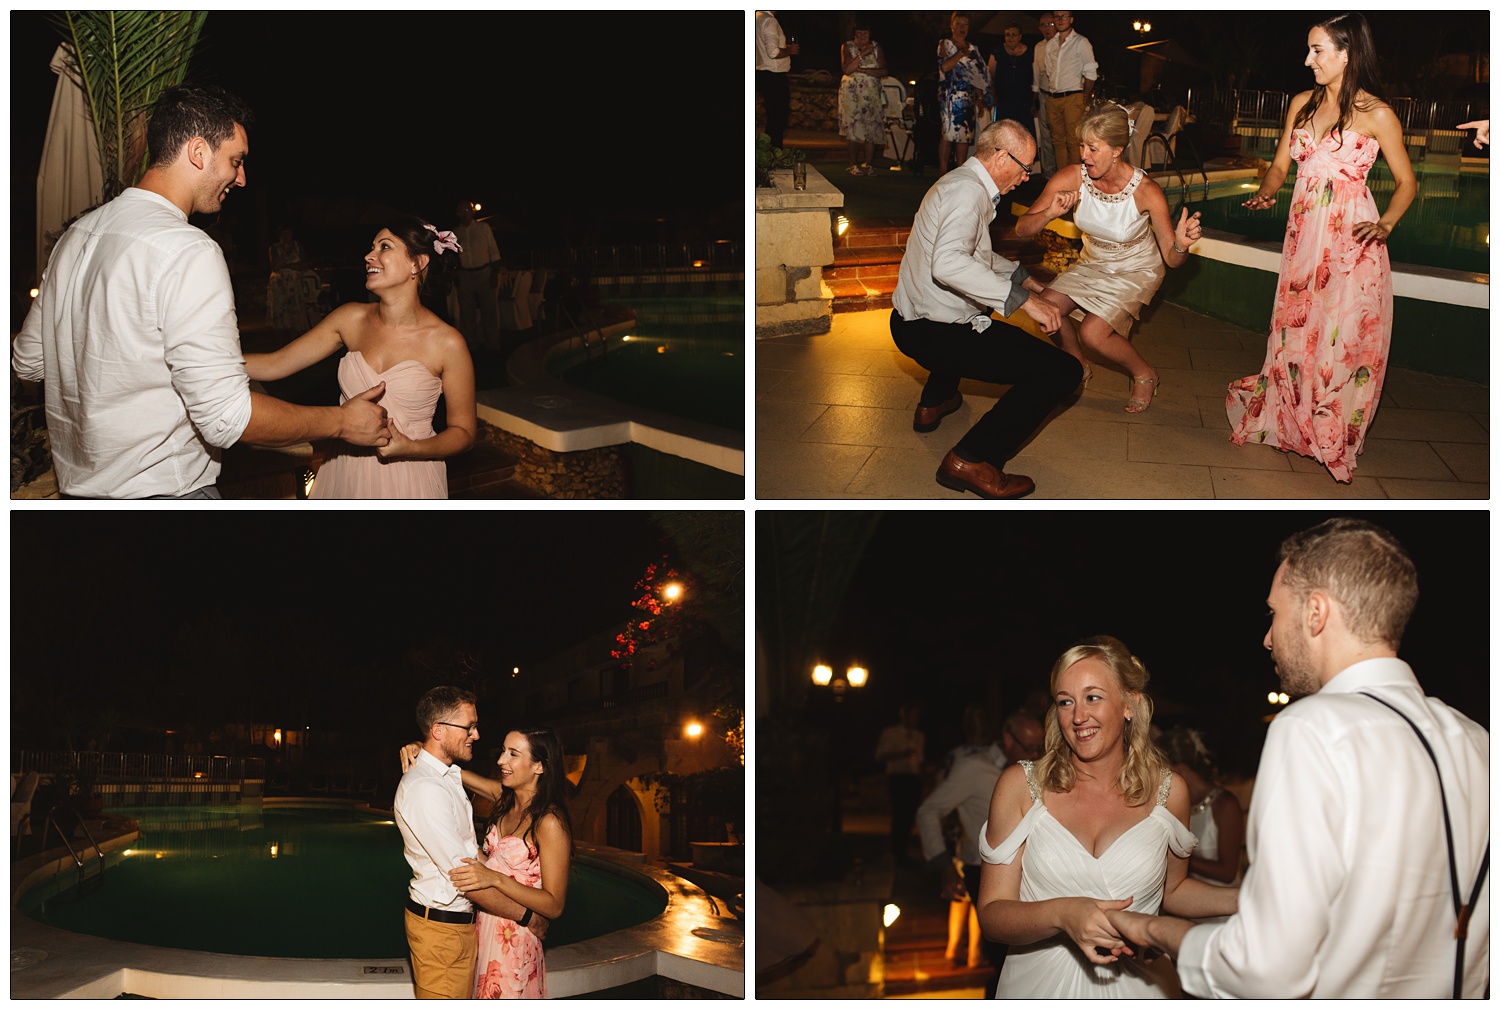 Wedding guests dancing by a pool at night.